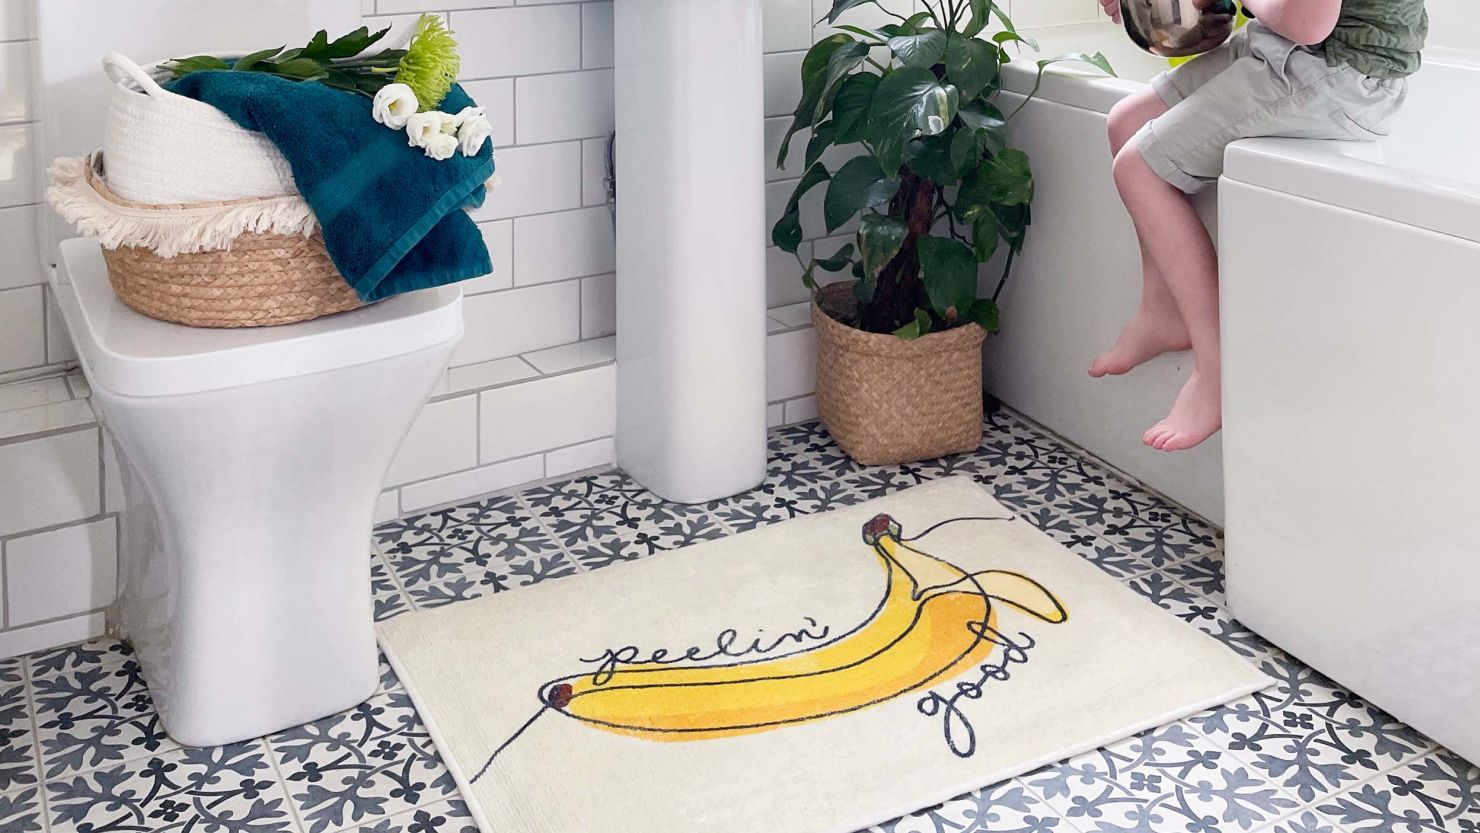 Ruggable bath mats are now available to shop